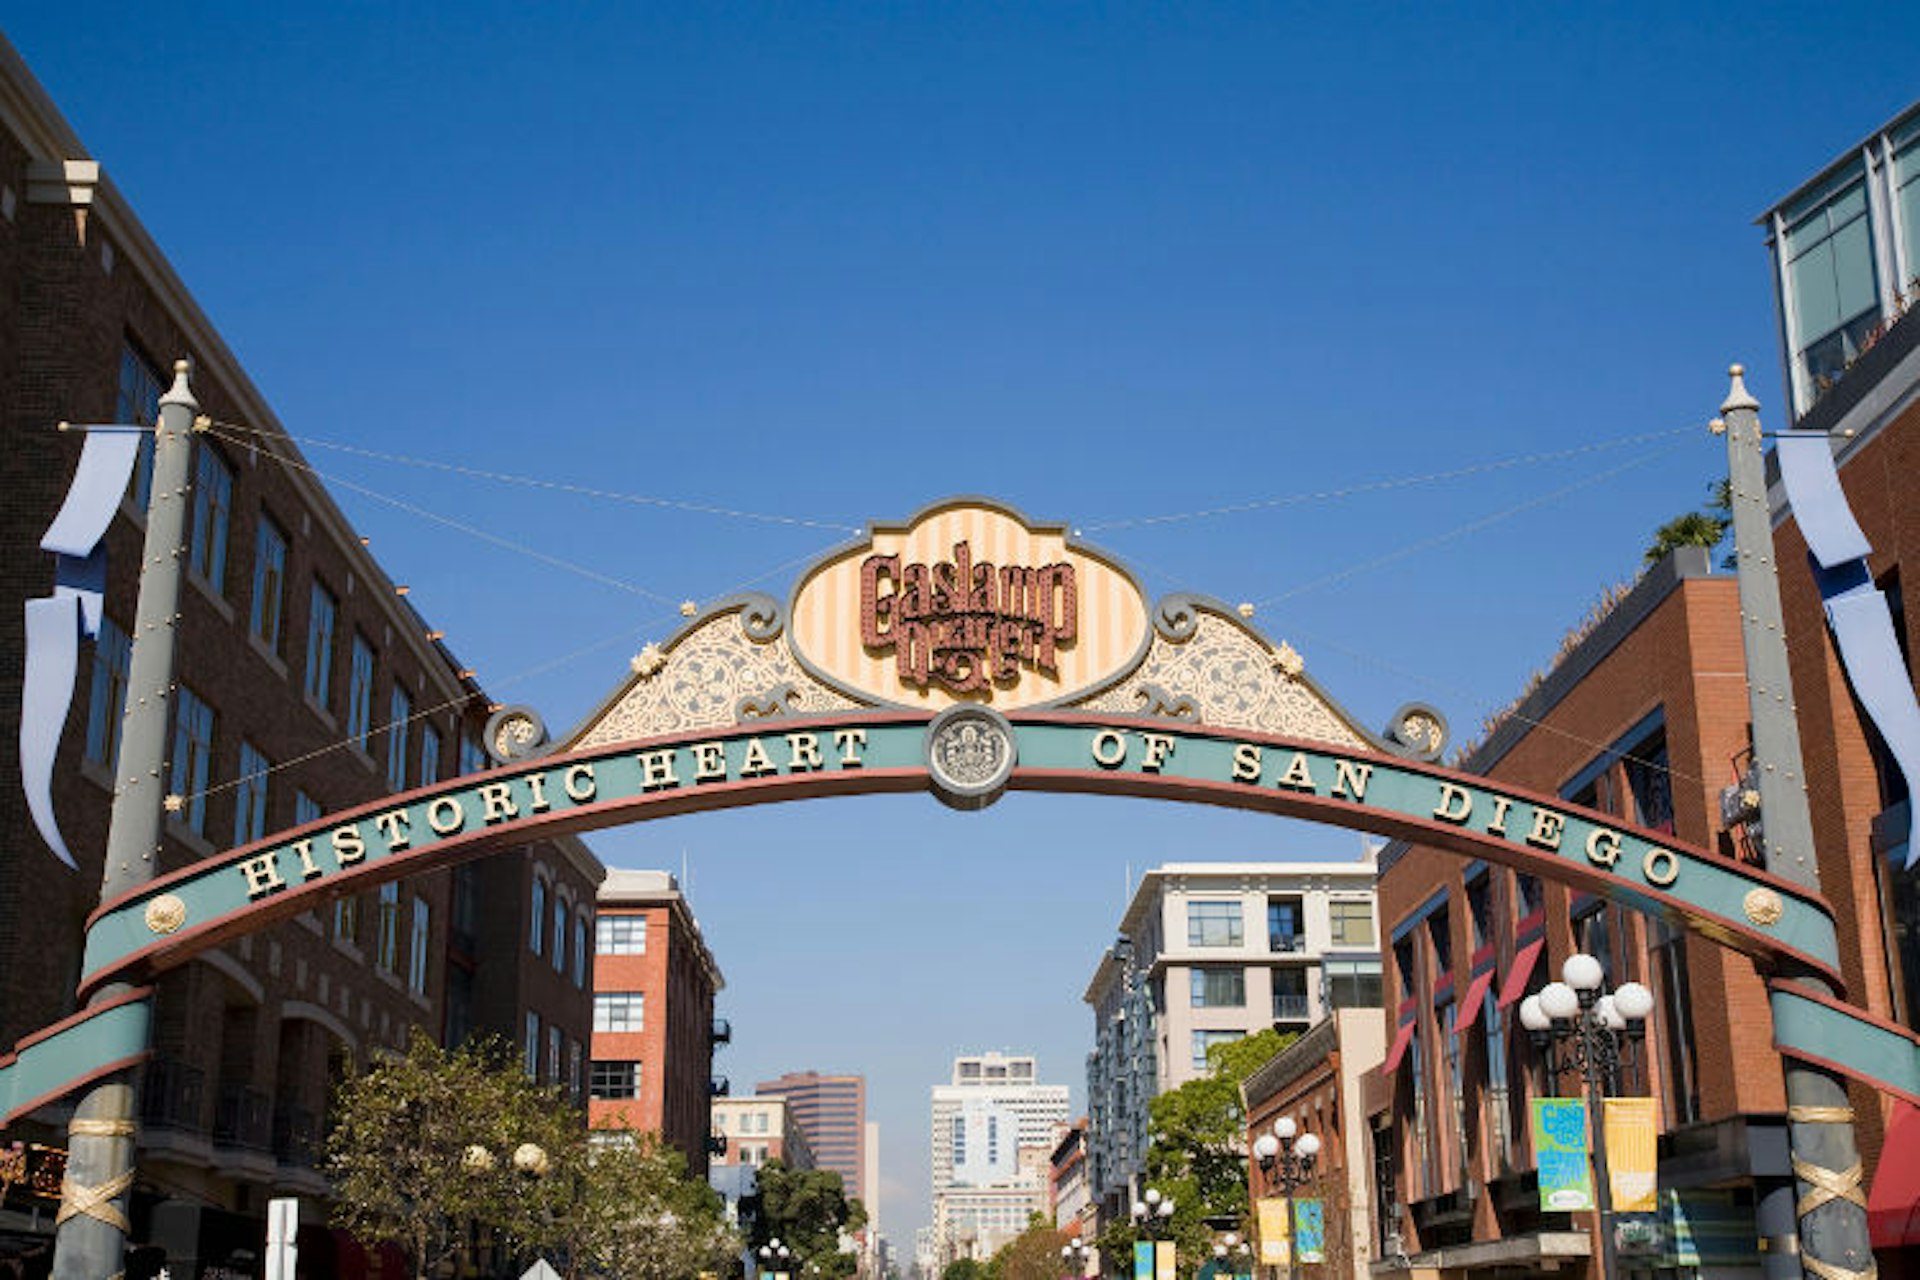 Gateway to San Diego's historic - and lively - Gaslamp Quarter. Image by Driendl Group / The Image Bank / Getty